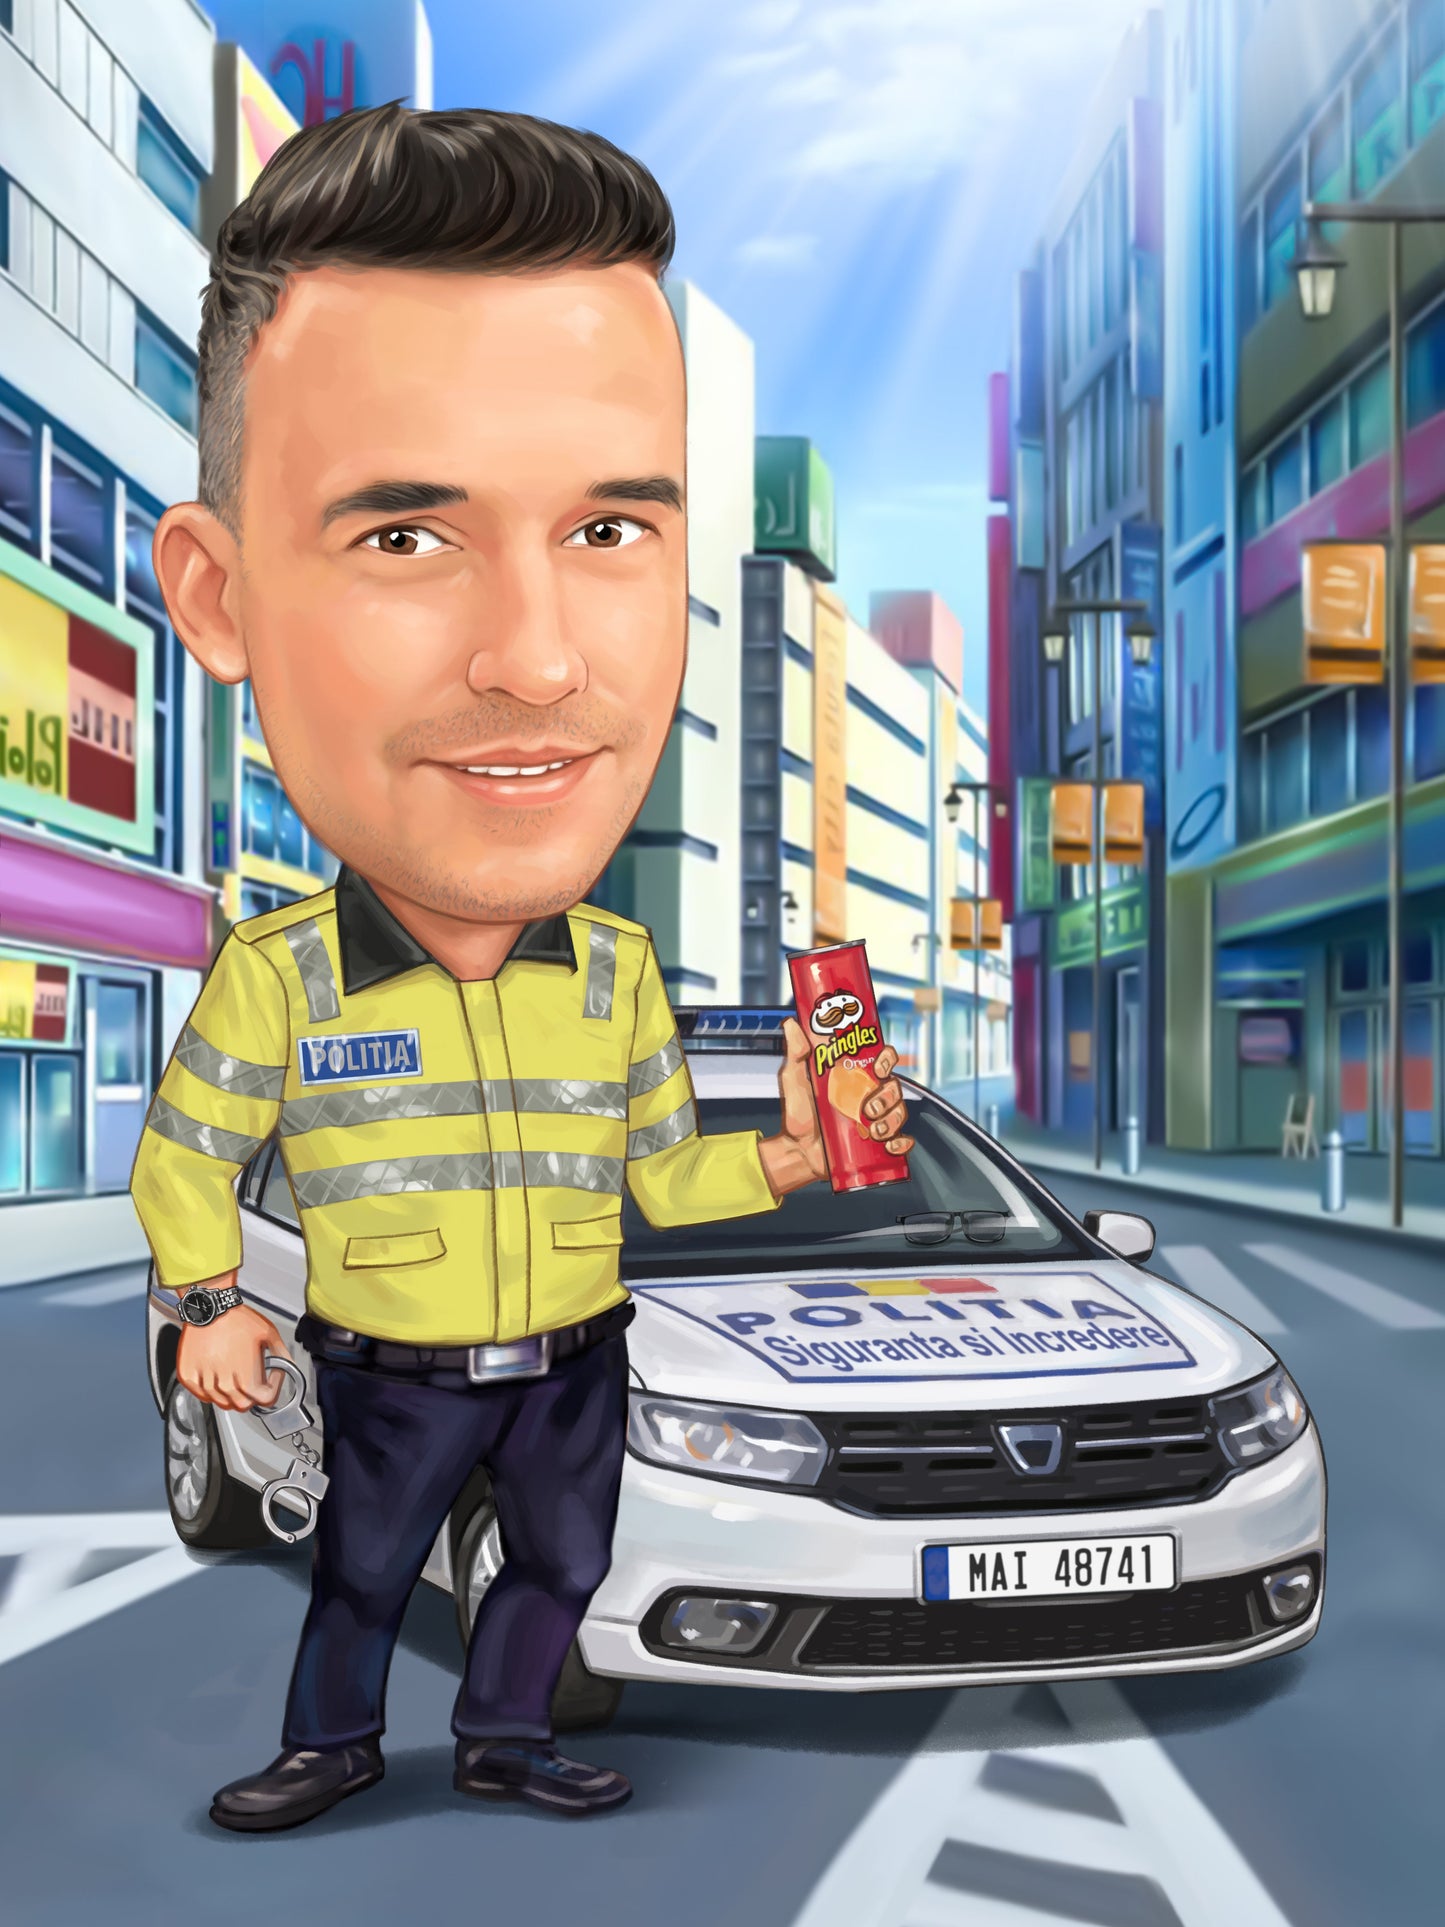 Policeman with chips caricature